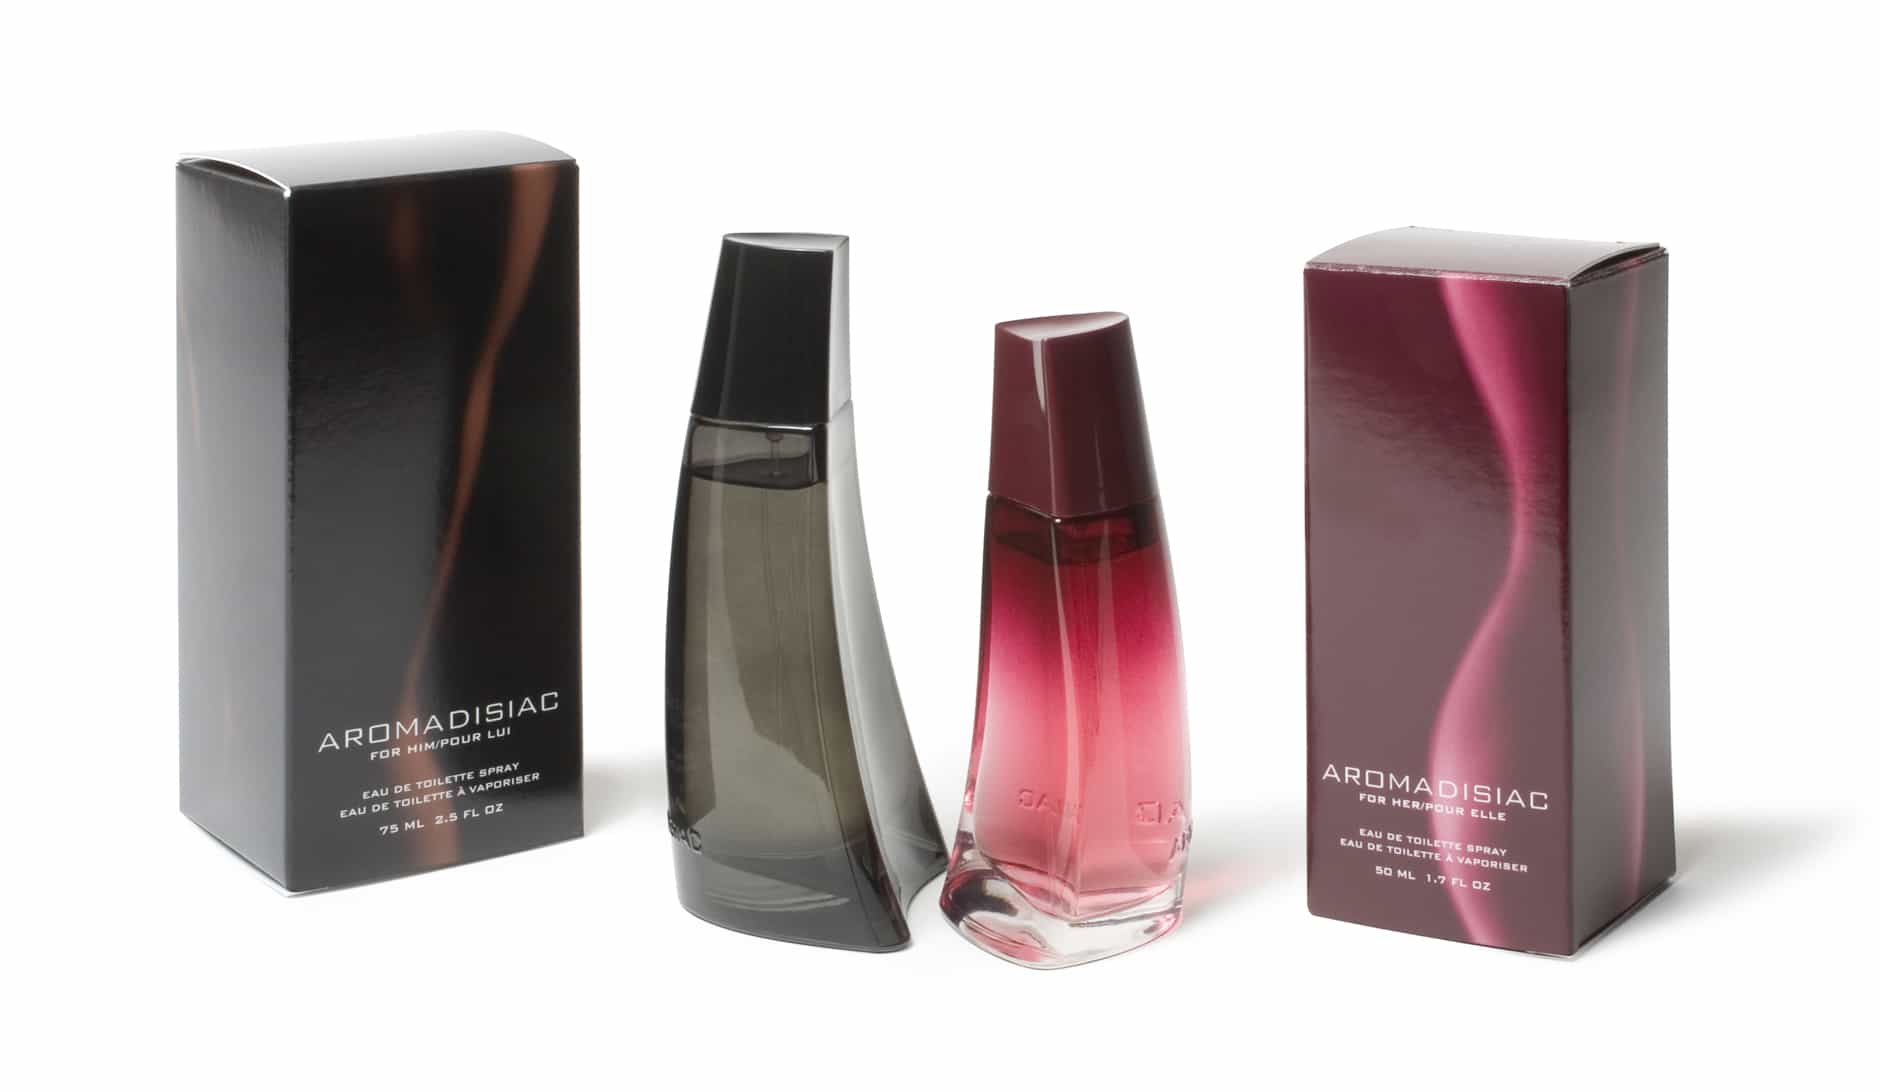 A duo fragrance bottle set designed to fit within each other with black and deep pink fragrance boxes to match each product